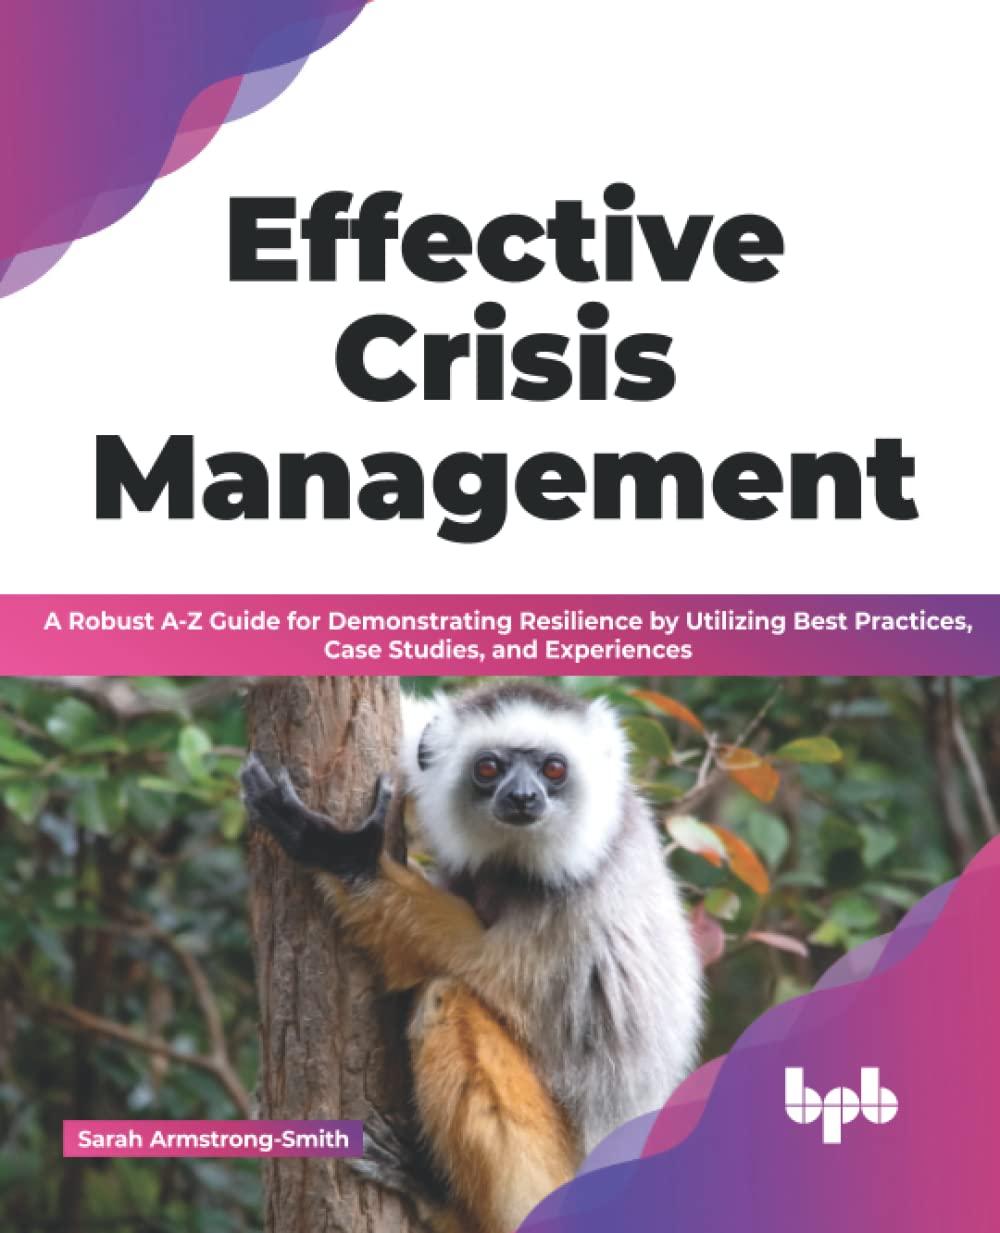 effective crisis management a robust a-z guide for demonstrating resilience by utilizing best practices case